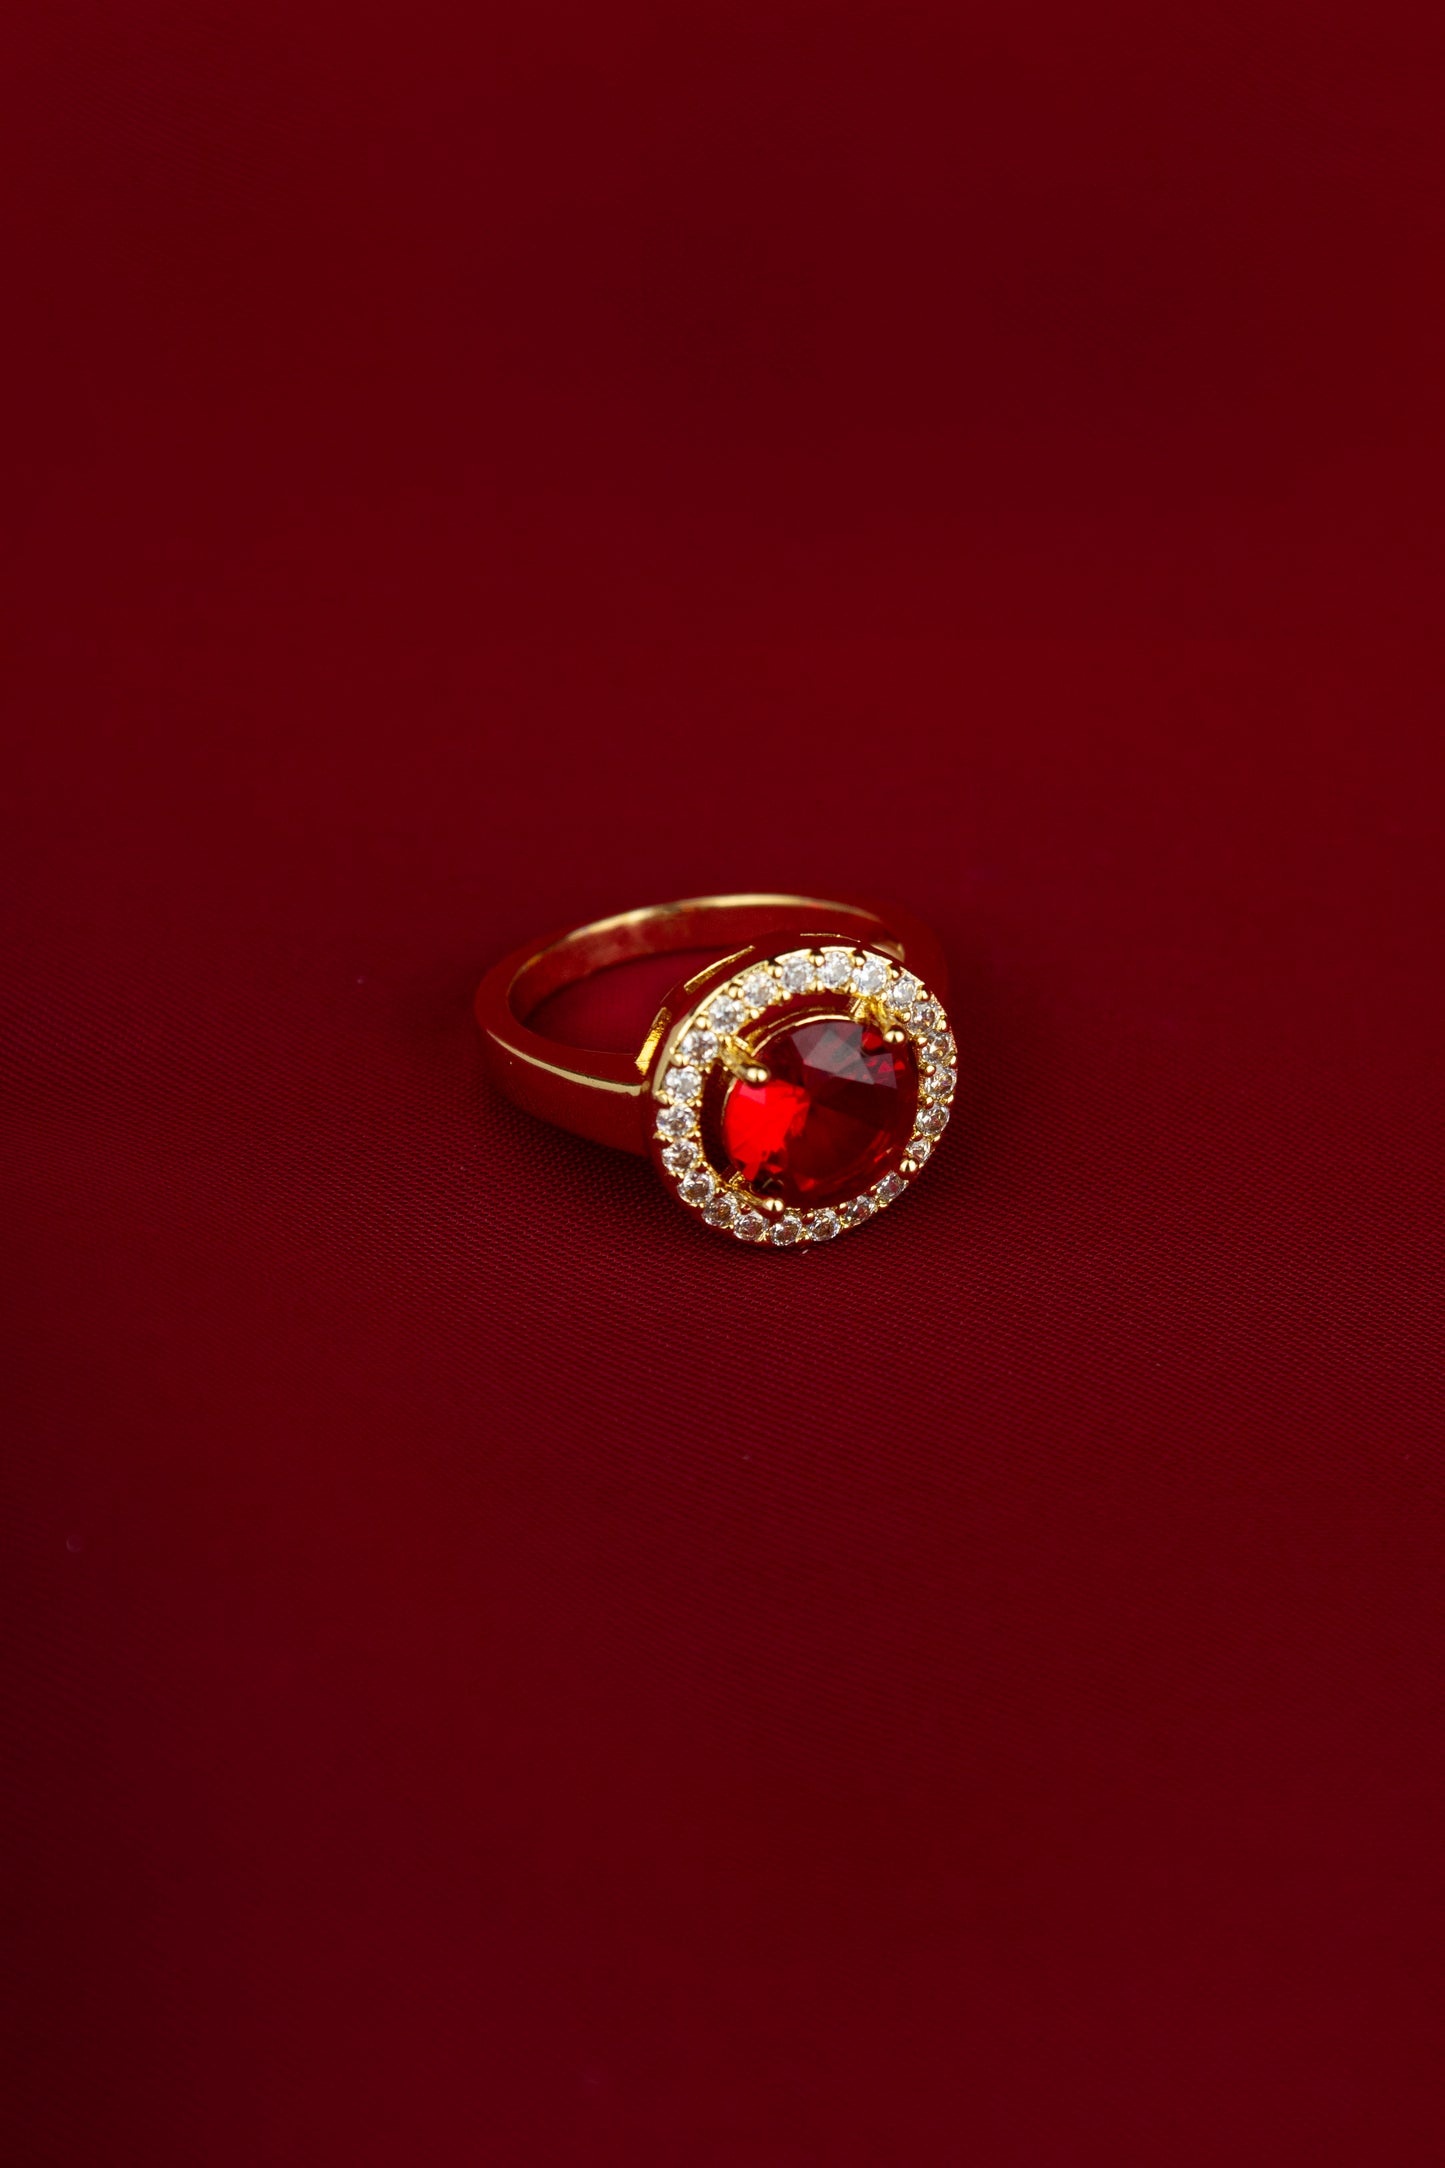 Special Round Ring - Red Diamond - One Carat Gold Plated